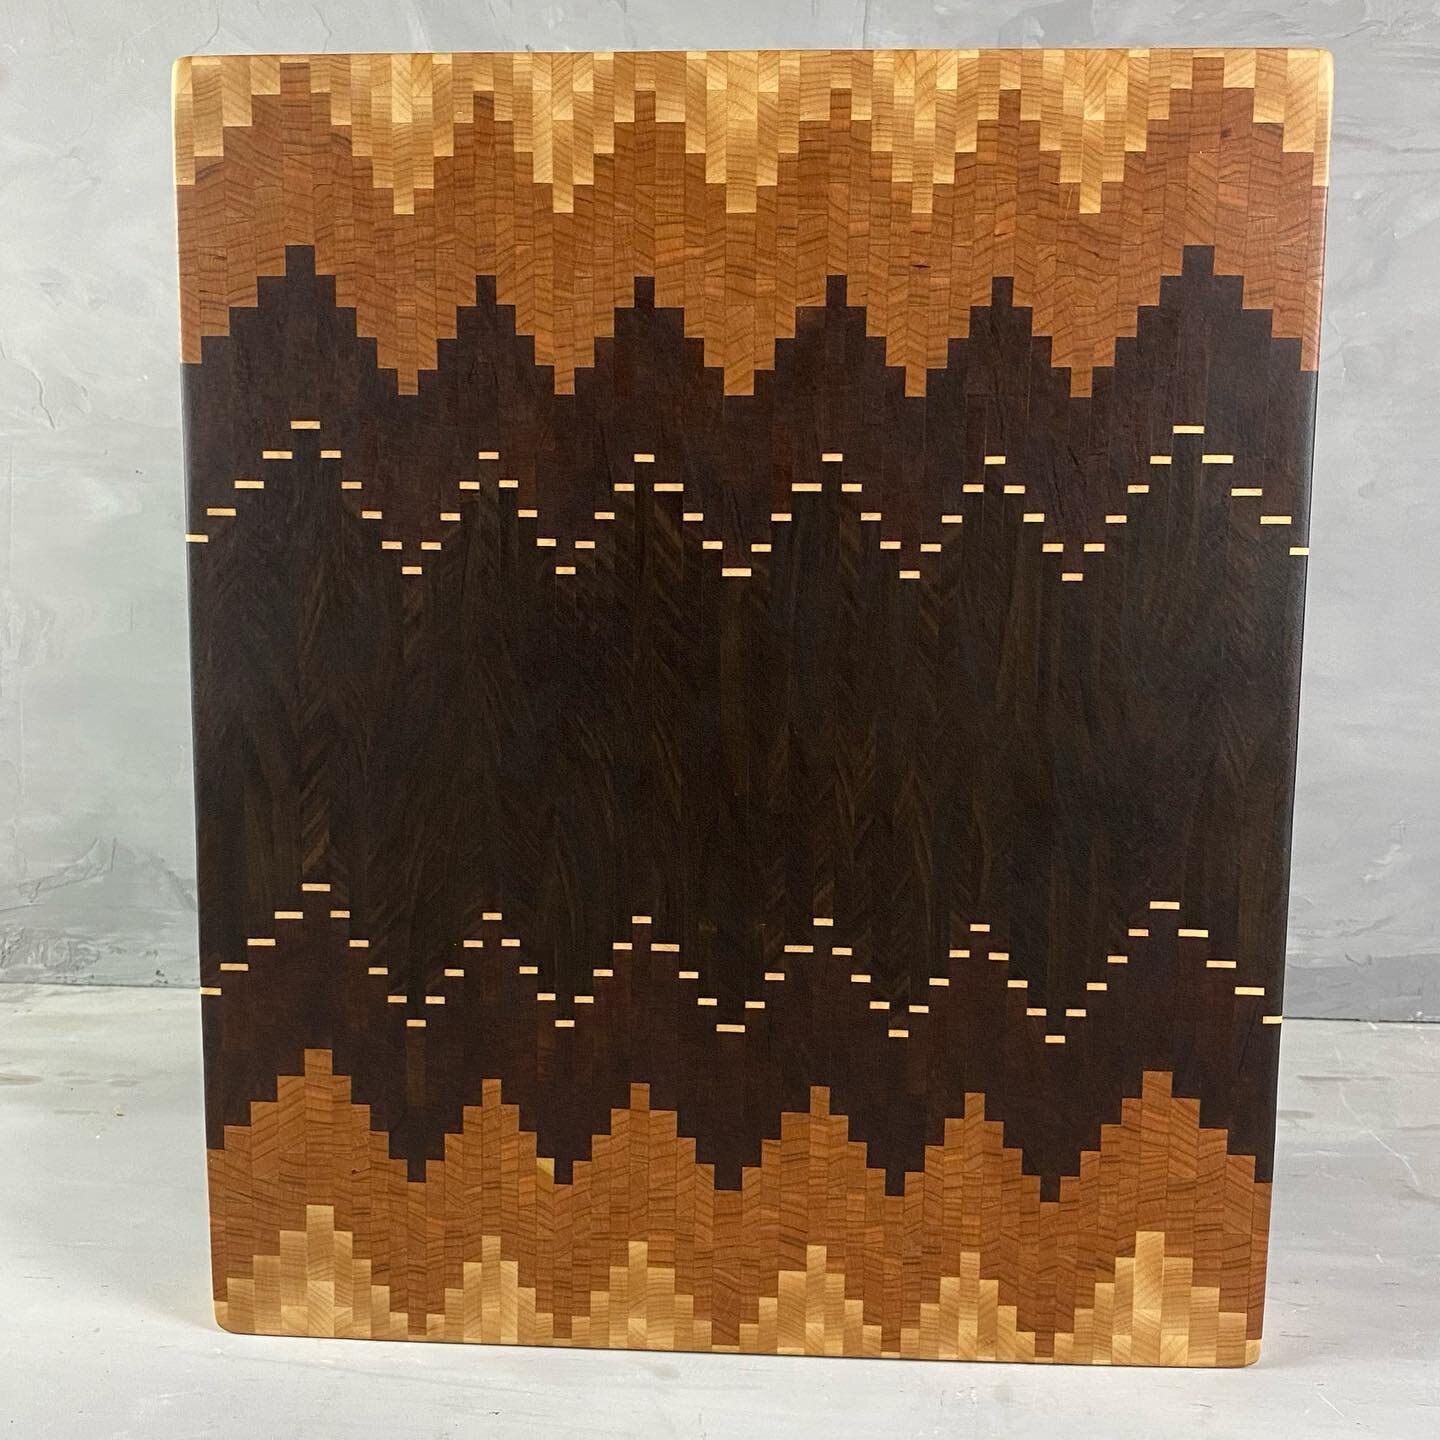 It&rsquo;s not a blanket it&rsquo;s a cutting board. Duh!!!! Walnut, cherry, maple and sapele. 
.
.
.
.
#endgrain&nbsp;#cuttingboards #endgraincuttingboards&nbsp; #endgraincuttingboard&nbsp; #choppingblock&nbsp;#cuttingboard&nbsp; #butcherblock&nbsp;